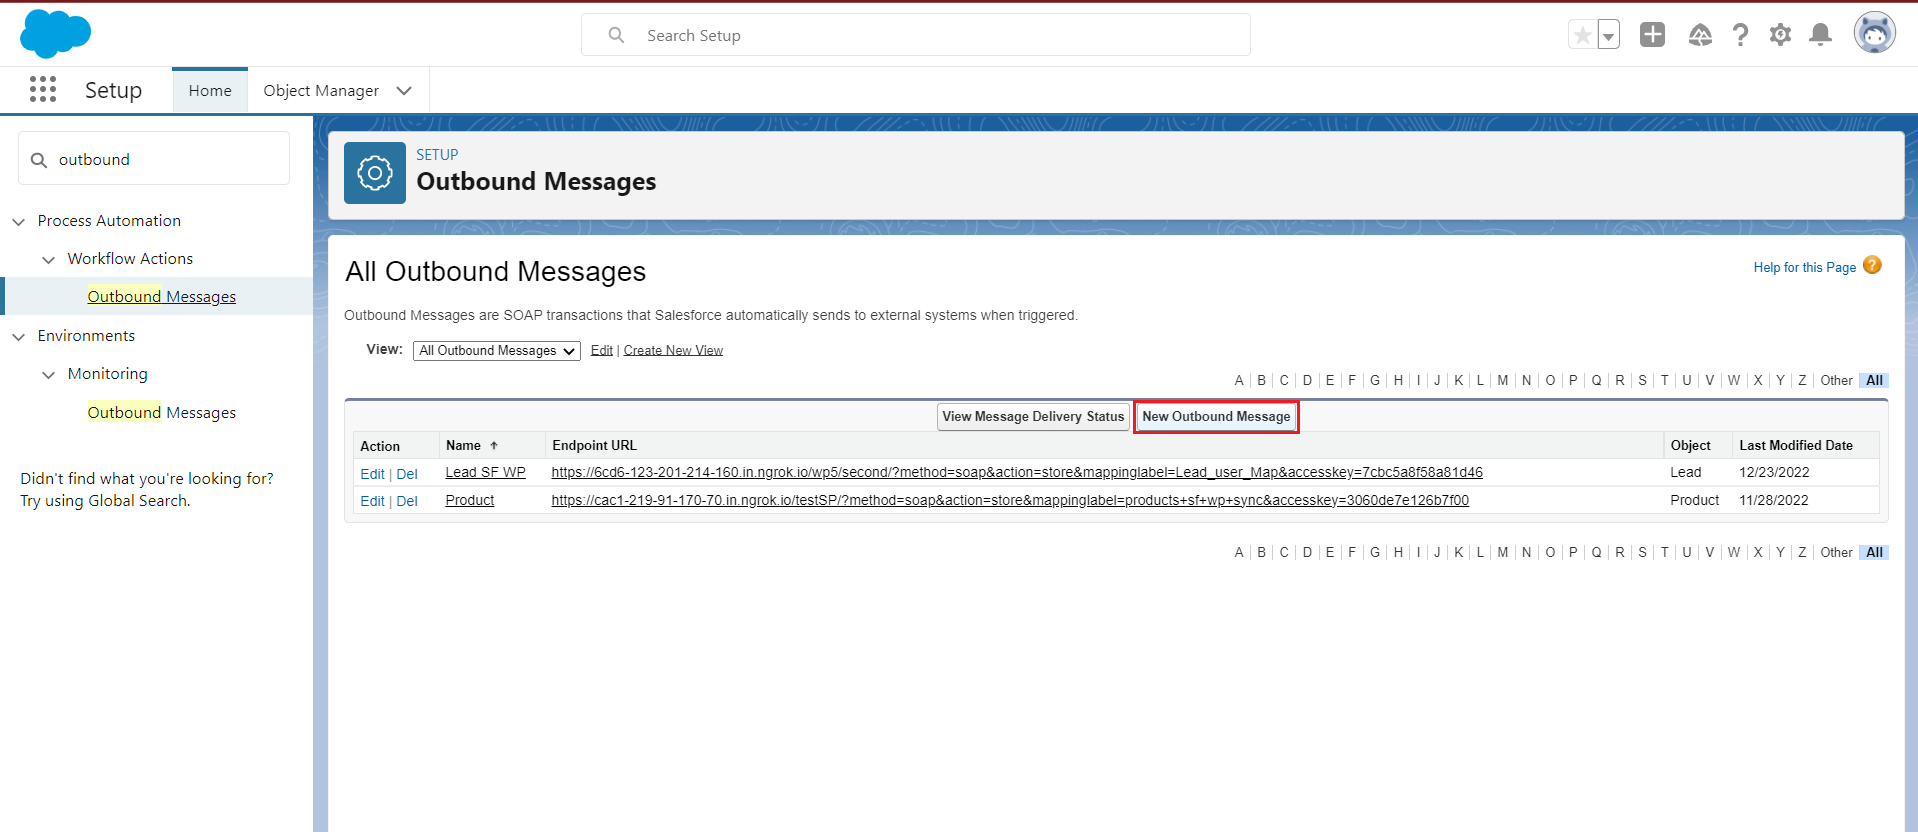  Salesforce to WP real time sync | New Outbound Message